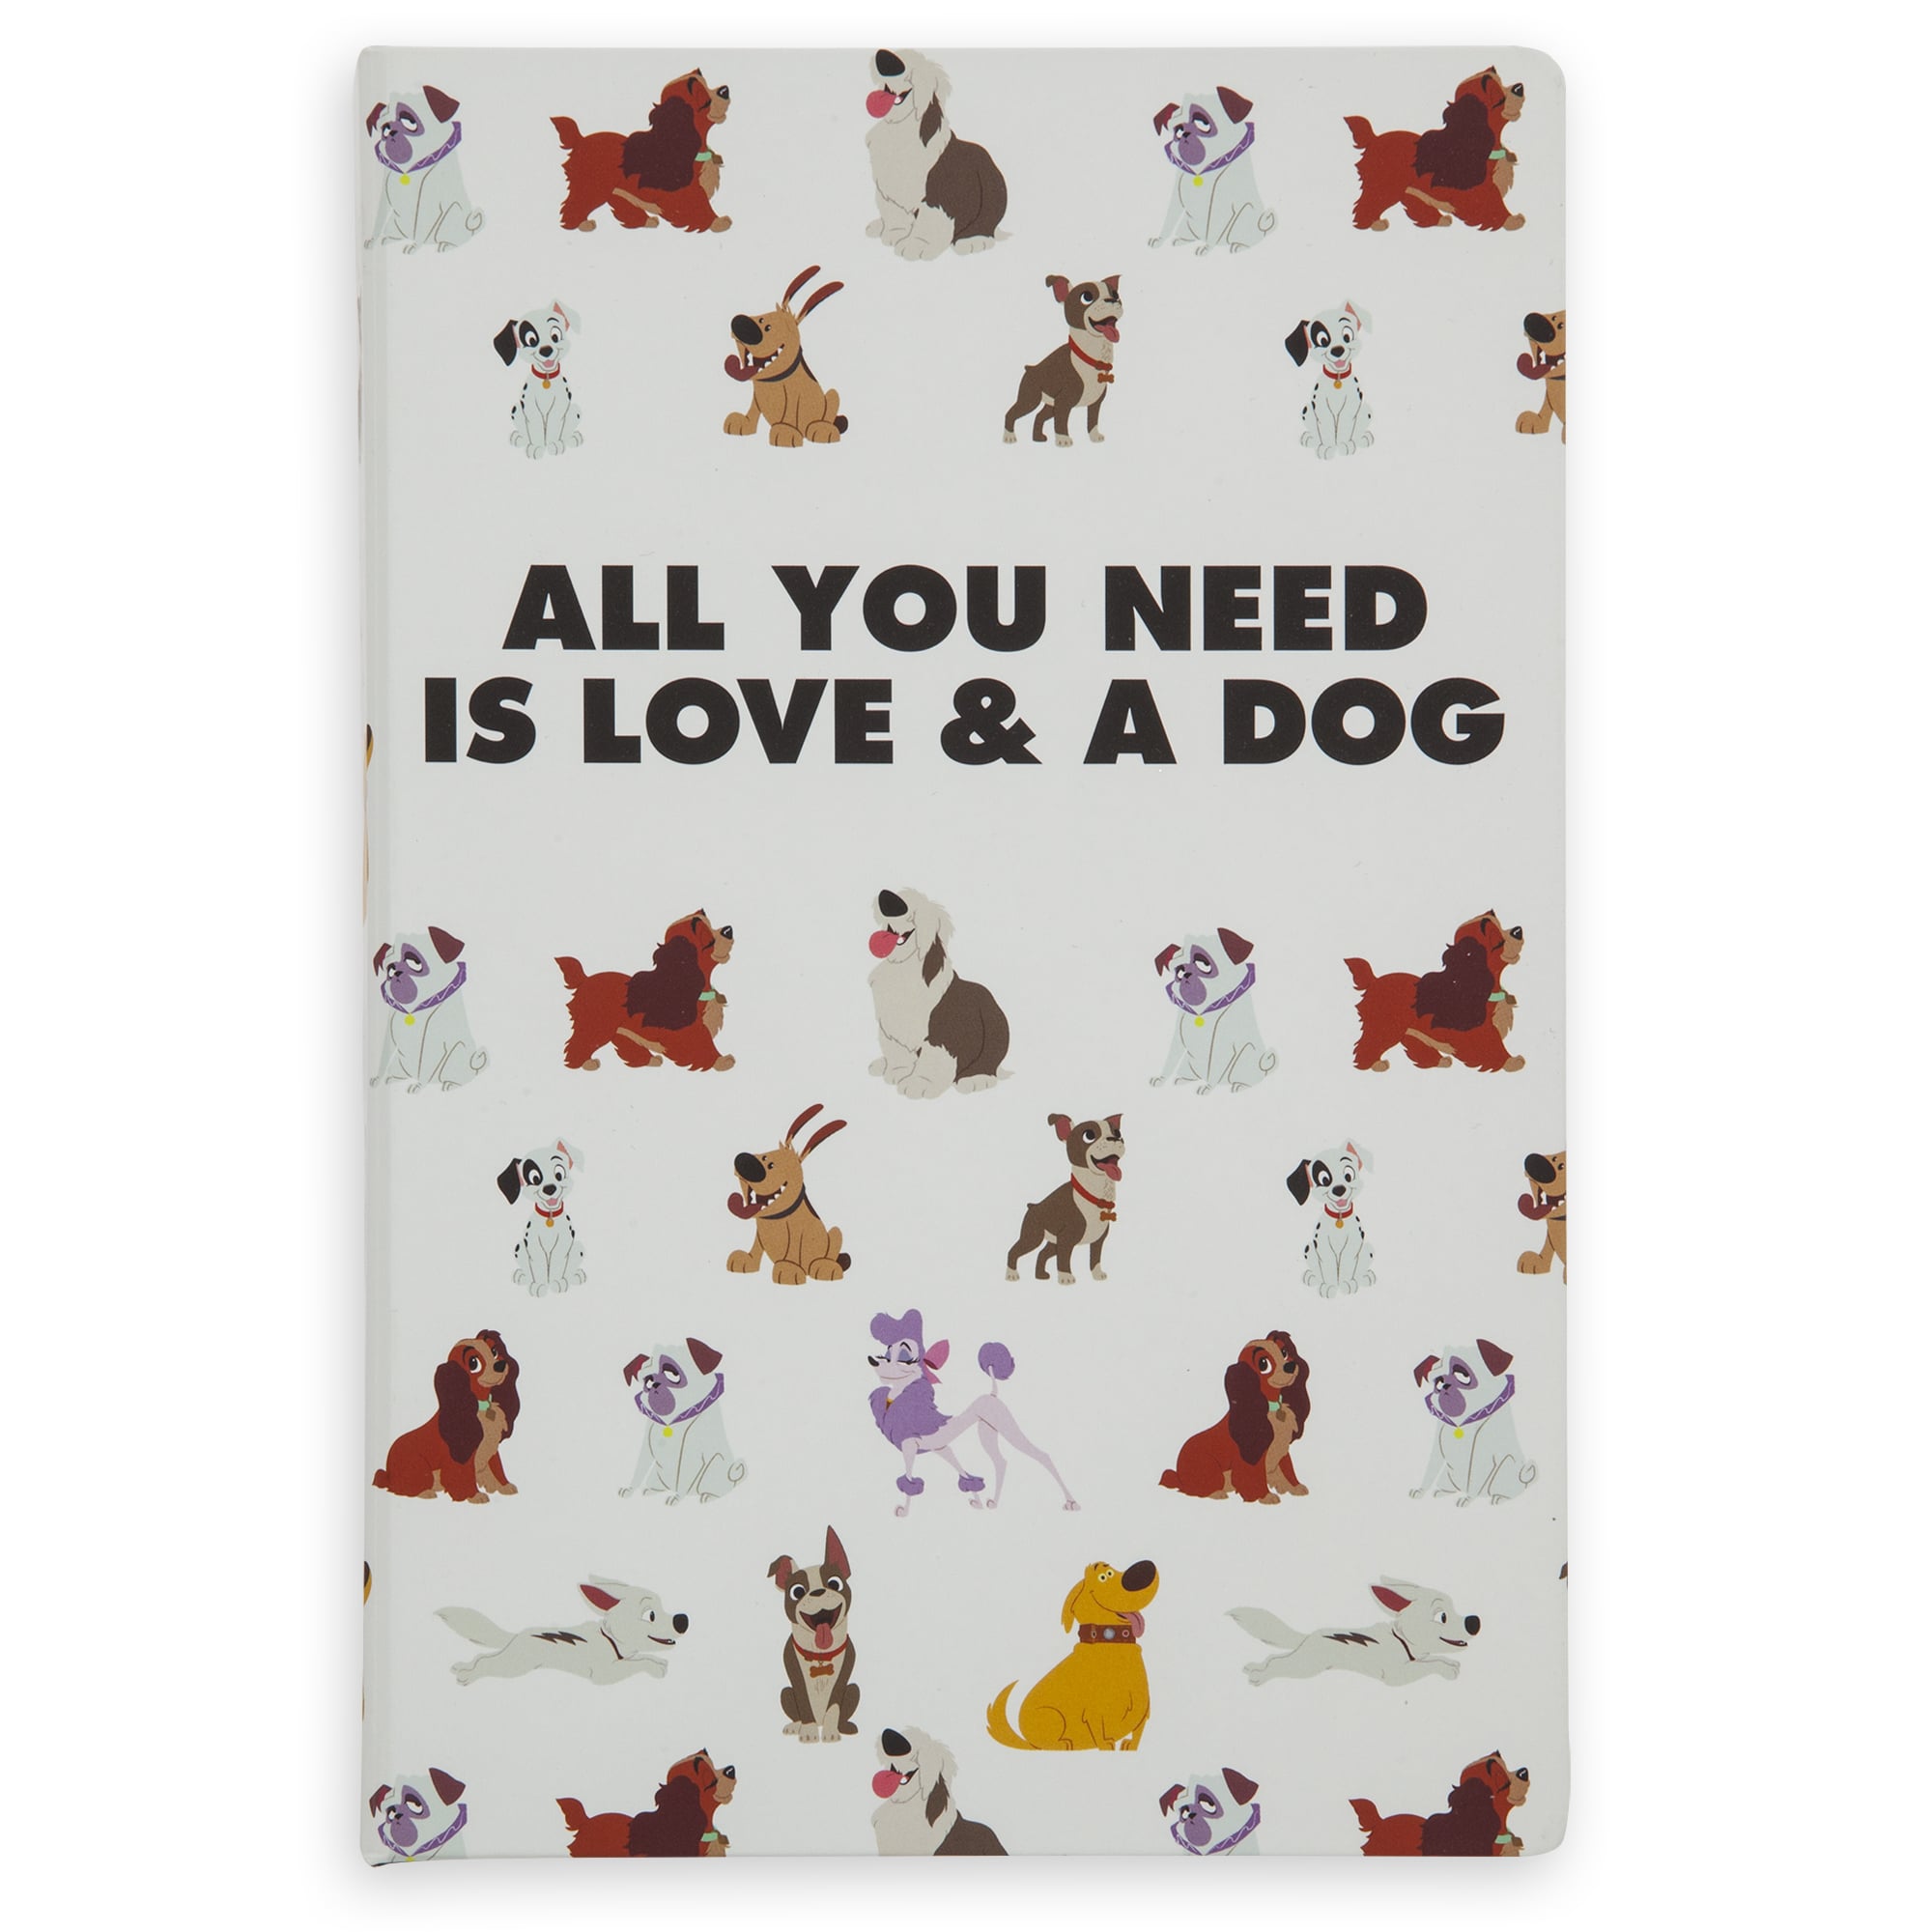 🤗🐶So many Disney dogs, so little time! Who is on your hug list